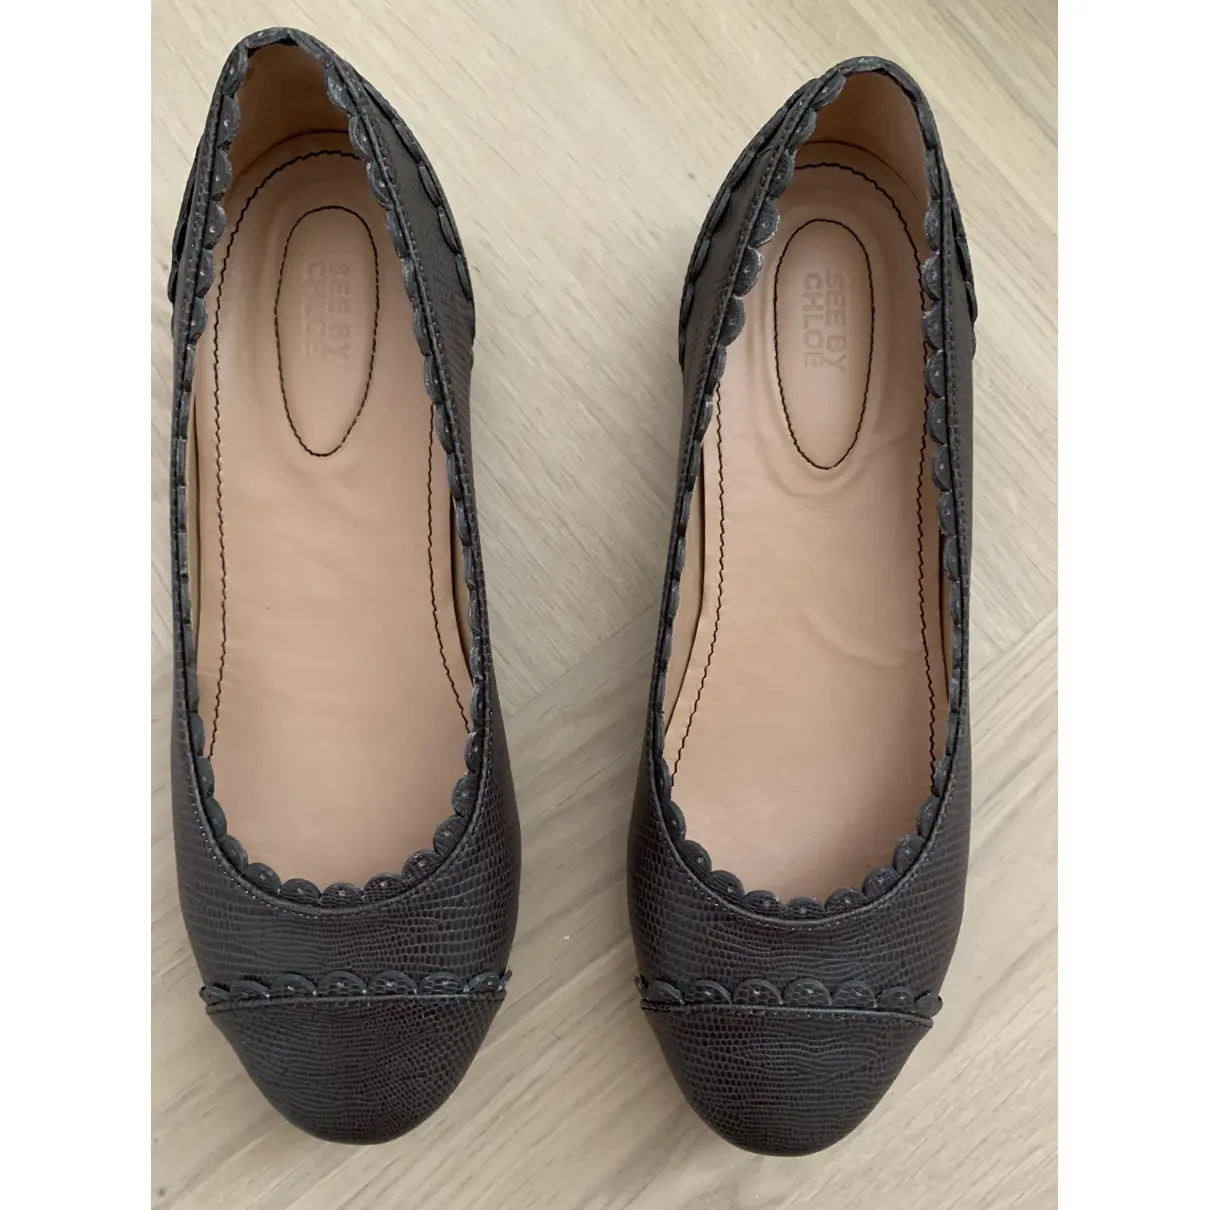 Buy See by Chloé Exotic leathers ballet flats online